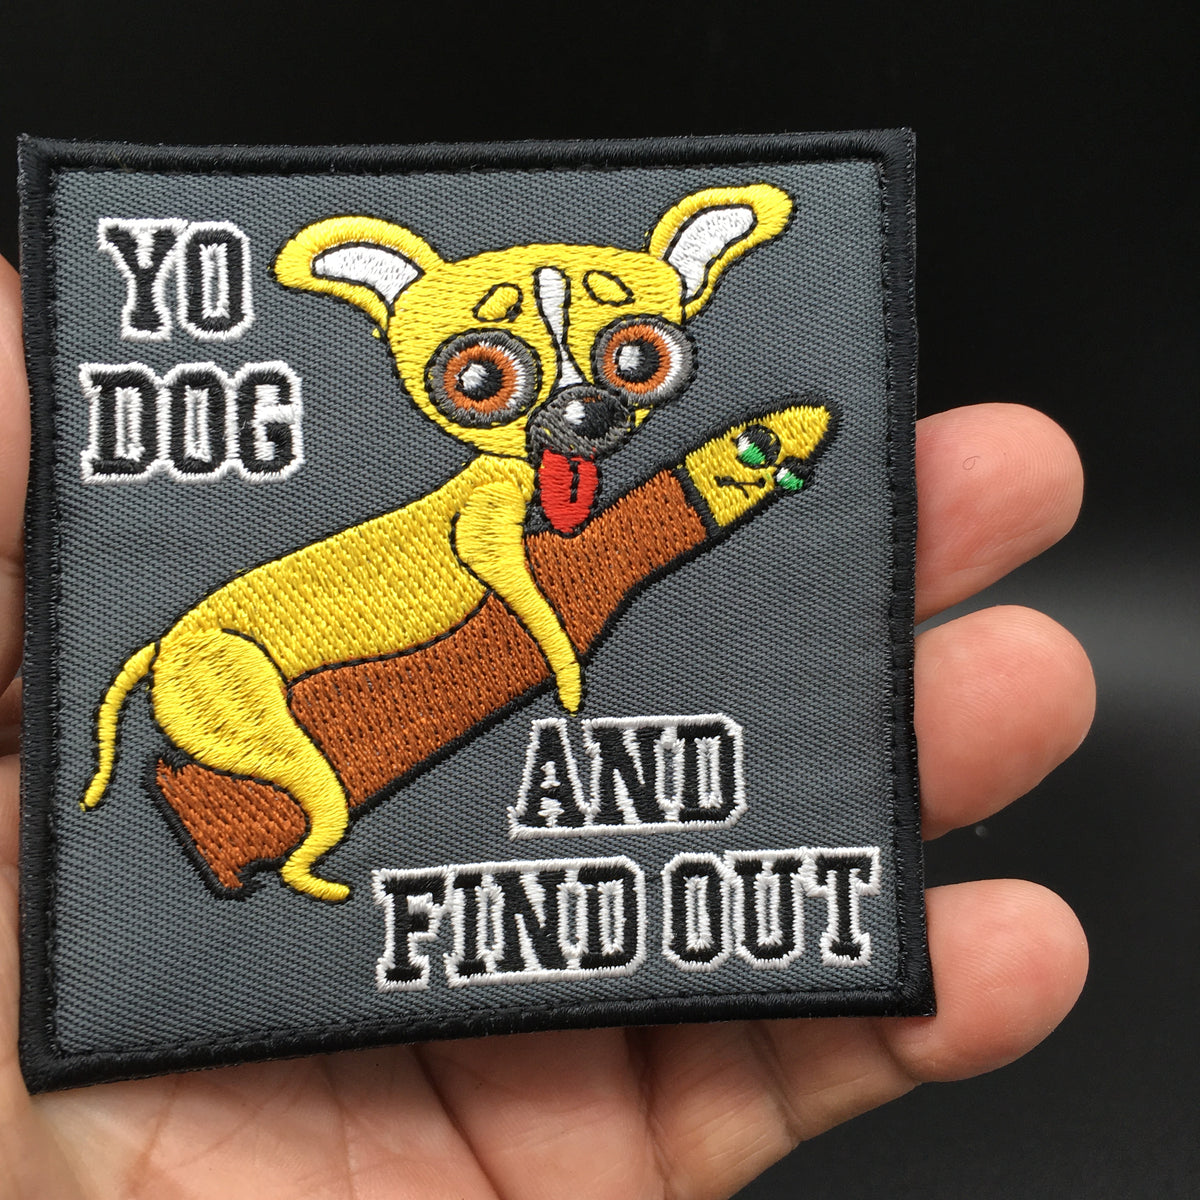  Golf Foxtrot Yankee Hook and Loop Tactical Funny Morale Patch  (Coyote and Black) : Sports & Outdoors